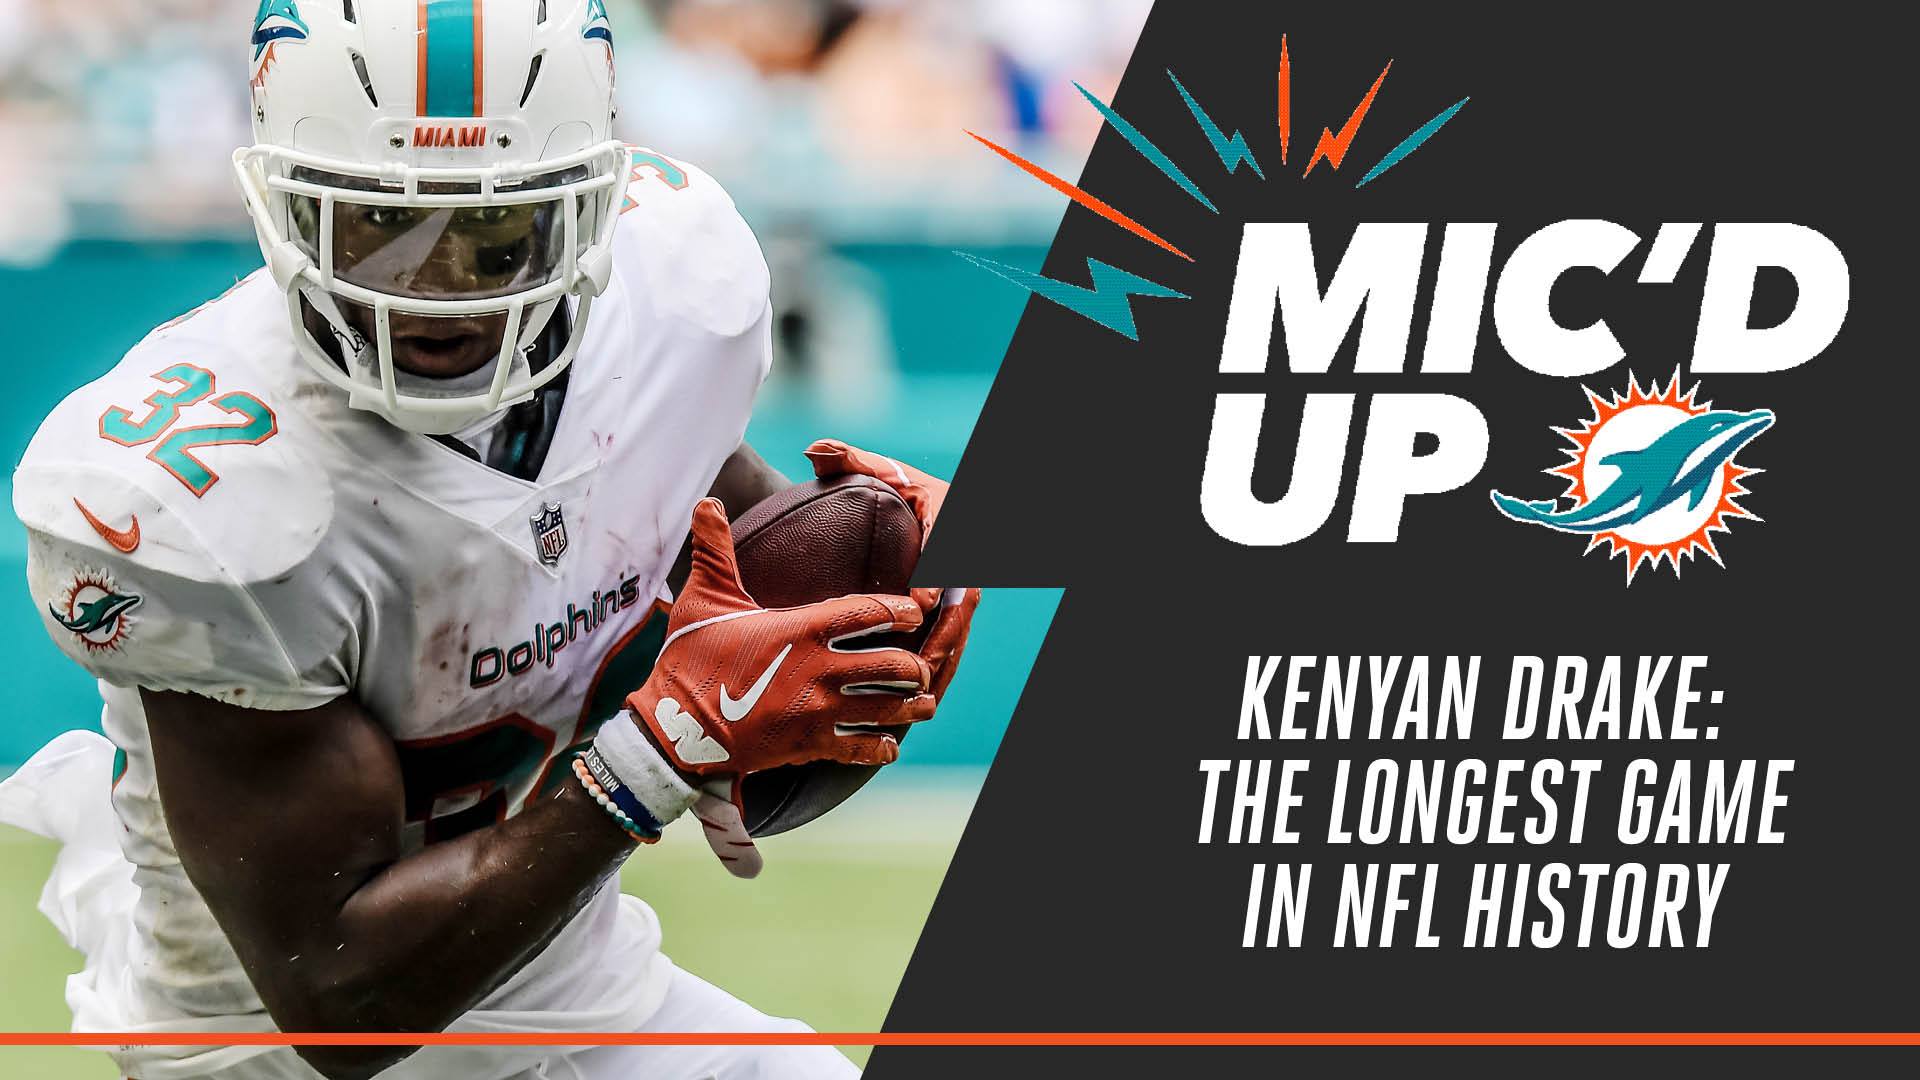 Miami Dolphins Mic D Up With Kenyan Drake The Longest Game In